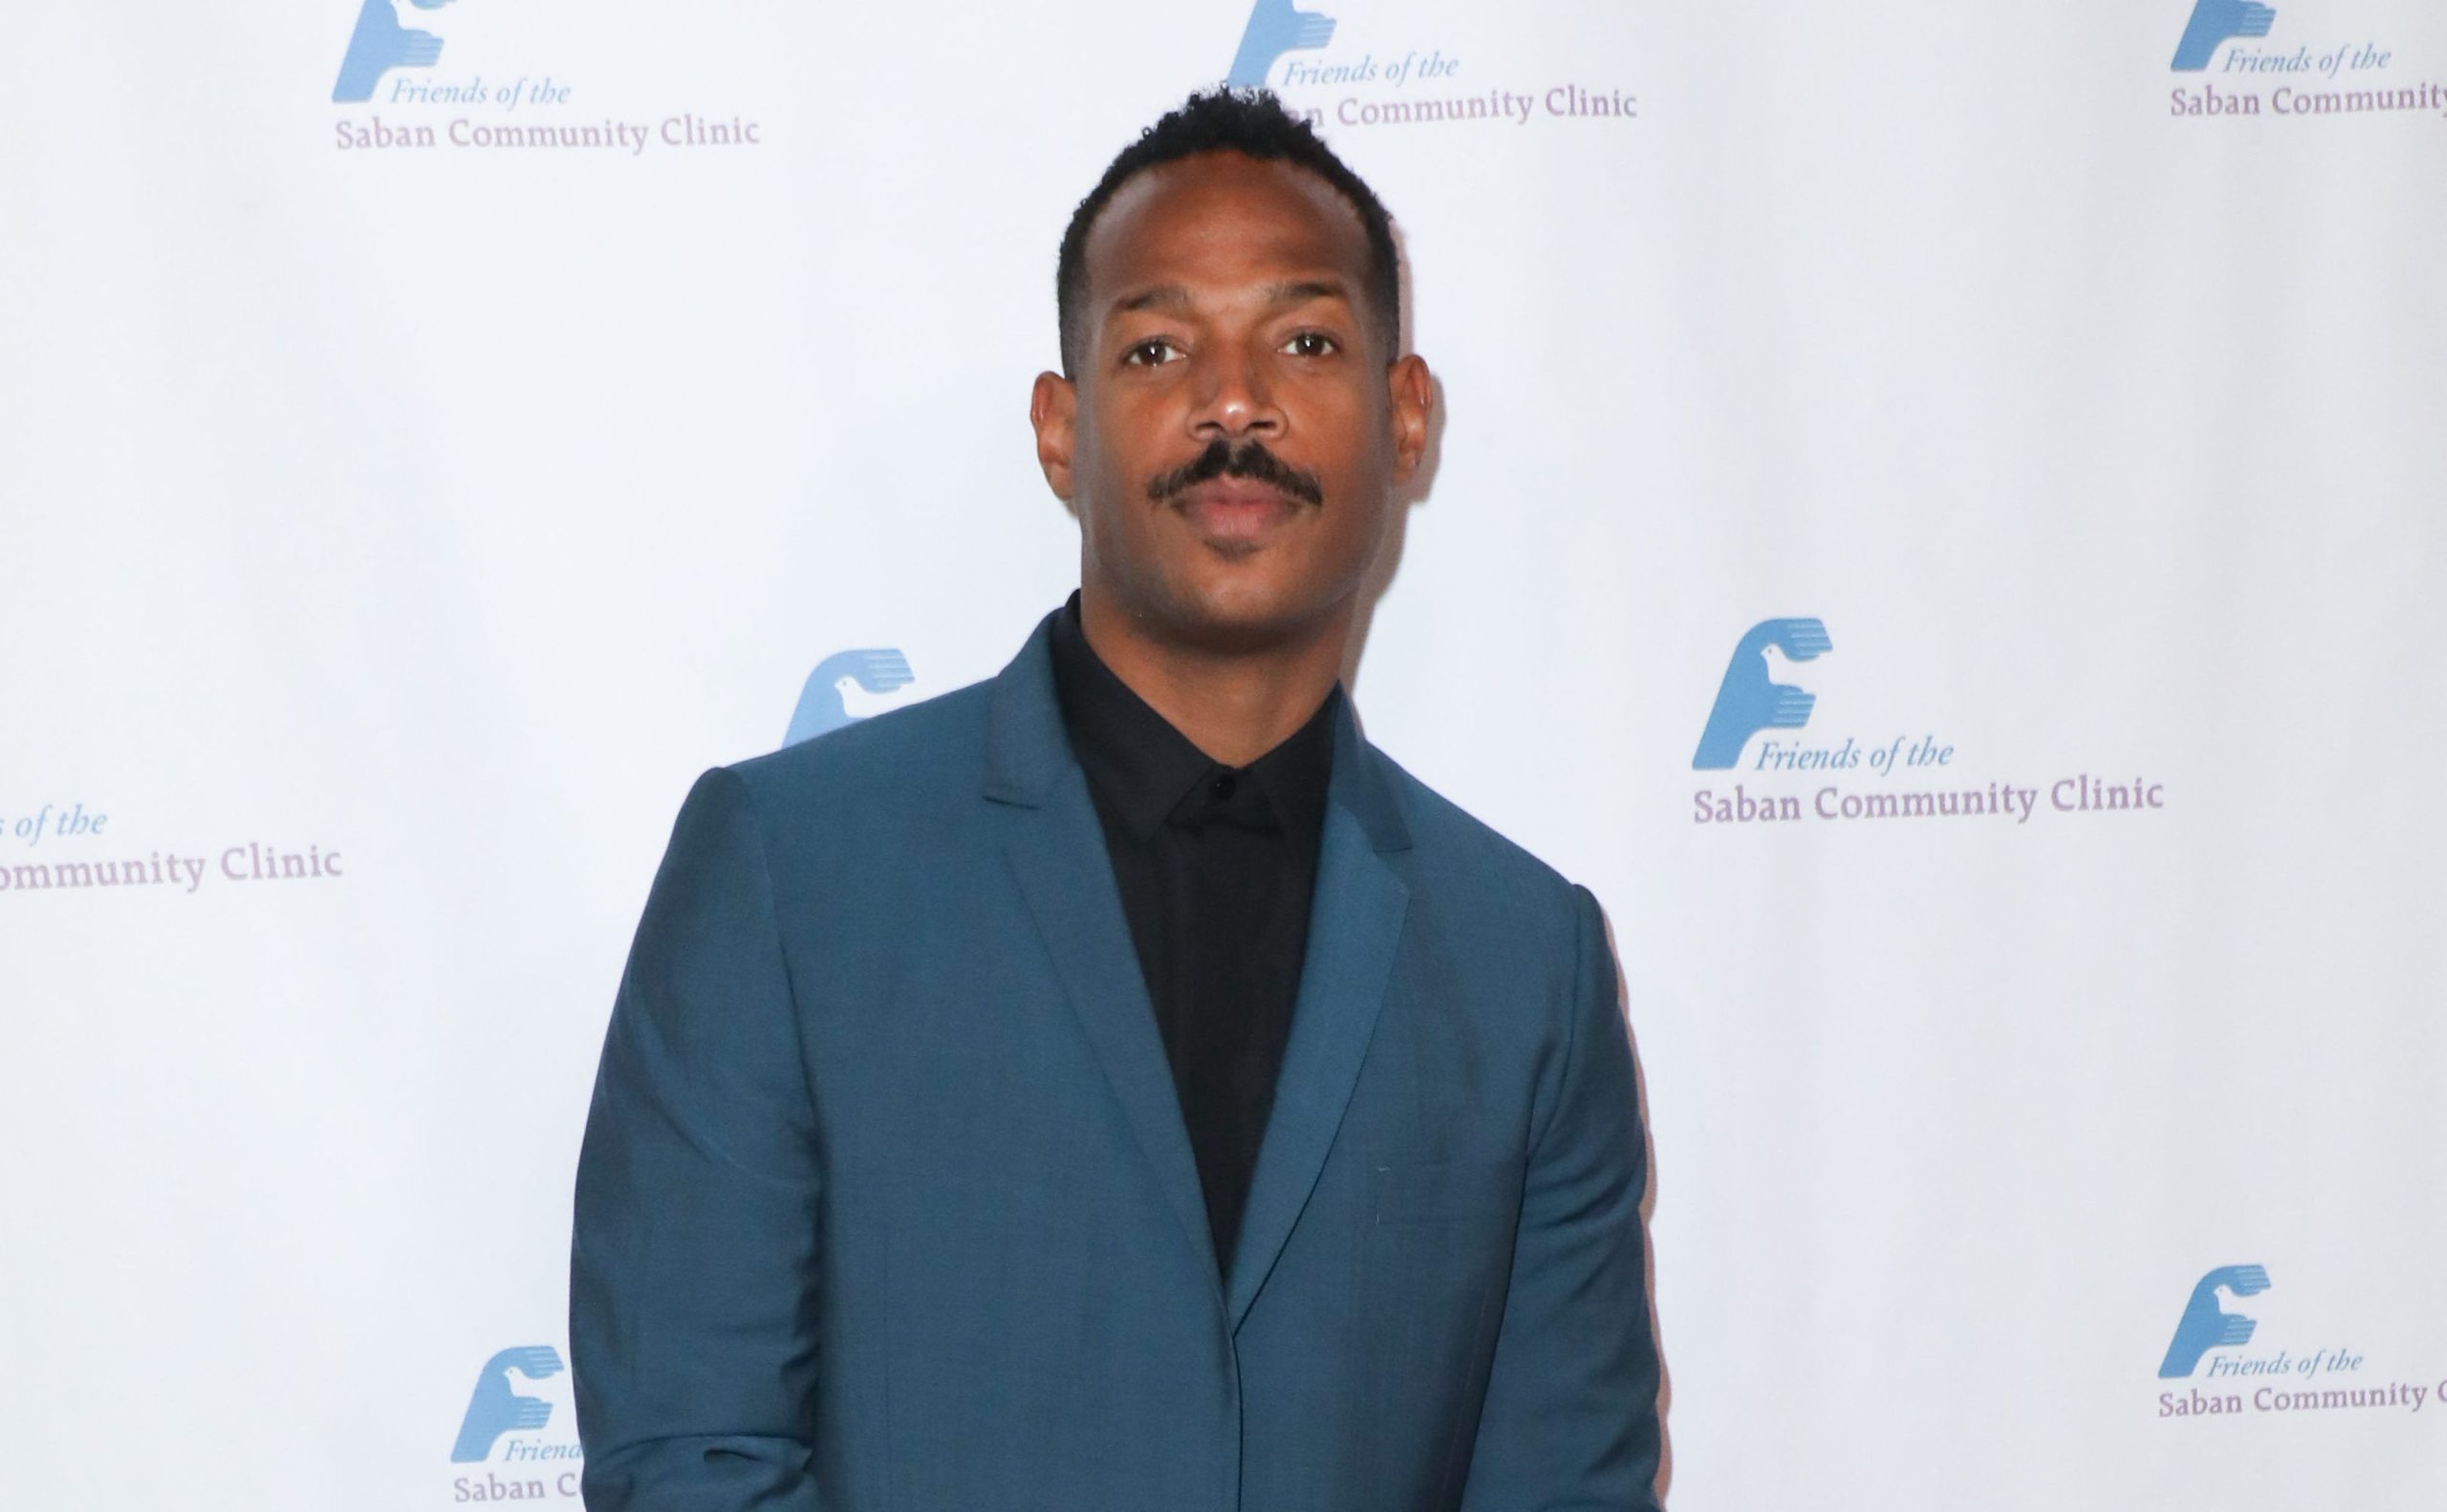 Marlon Wayans arrives at the Saban Community Clinic's 43rd Annual Dinner Gala held at The Beverly Hilton Hotel on November 18, 2019 in Beverly Hills, Los Angeles, California, United States. (Photo by Image Press Agency)